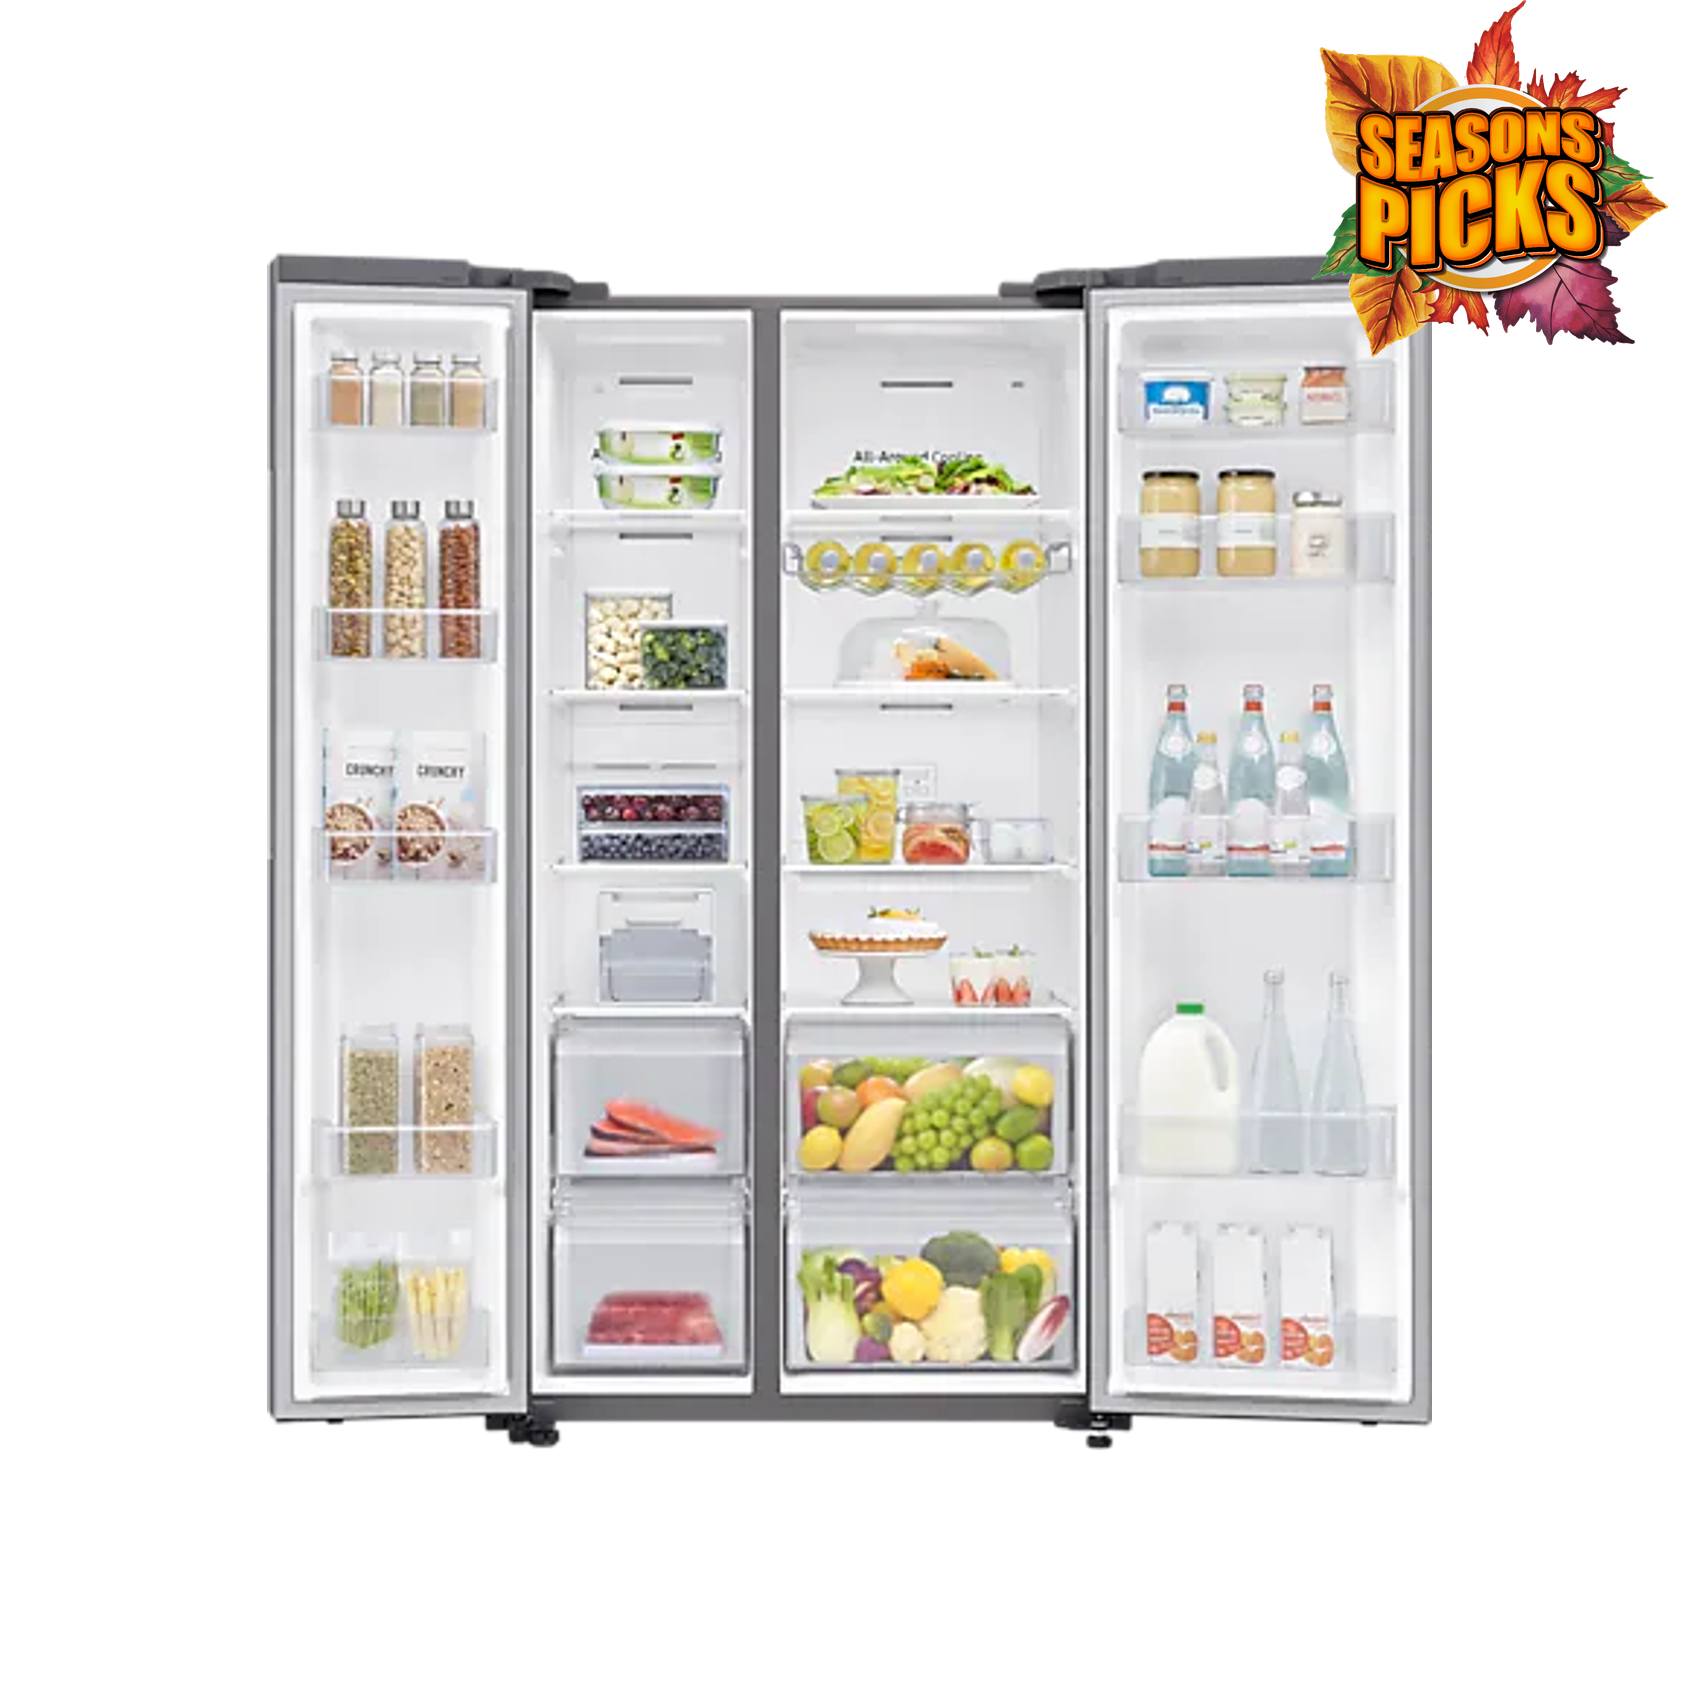 Samsung 647L Side By Side Fridge With Space Max Technology - Matt Silver (Photo: 6)